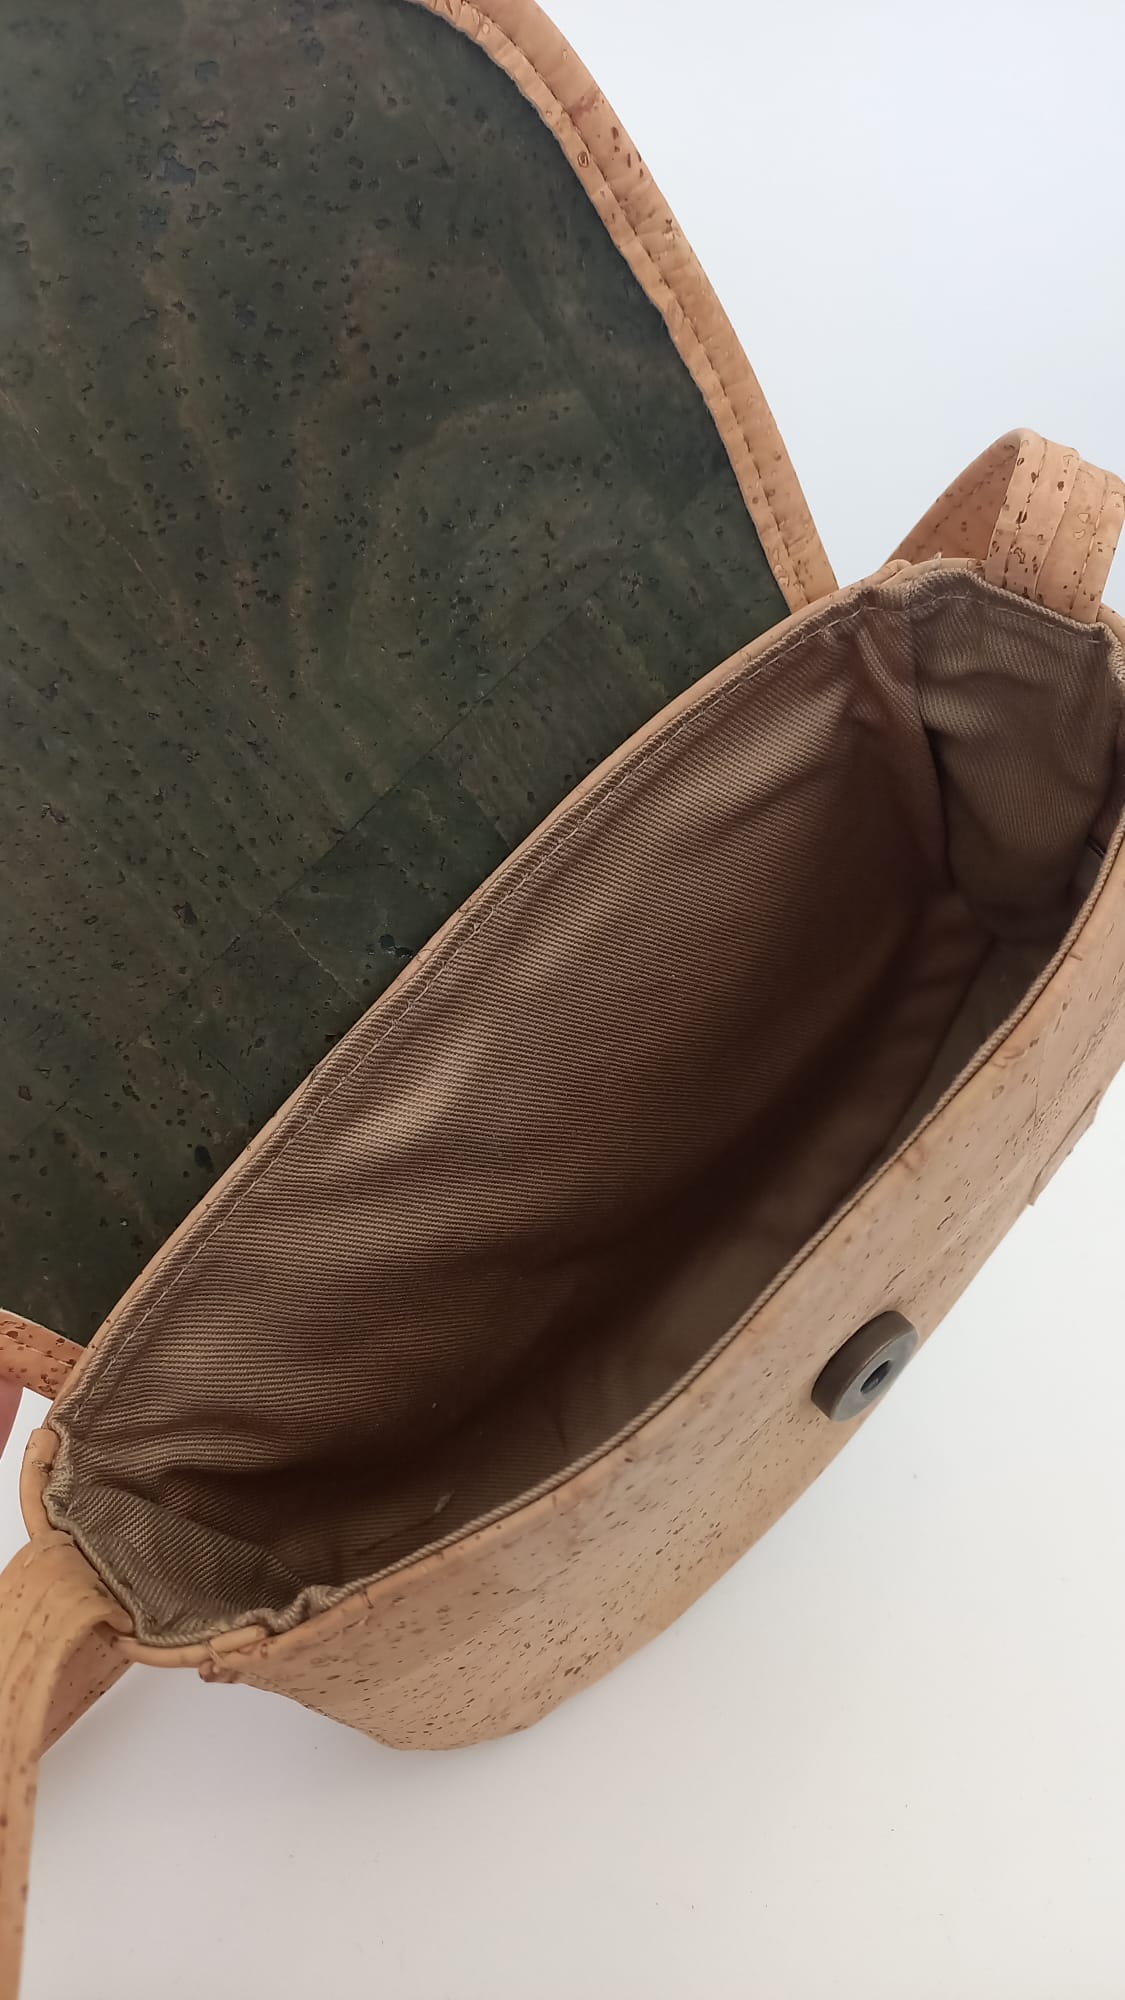 Linden Leaf Cork Bag - New Collection - Vegan and Sustainable